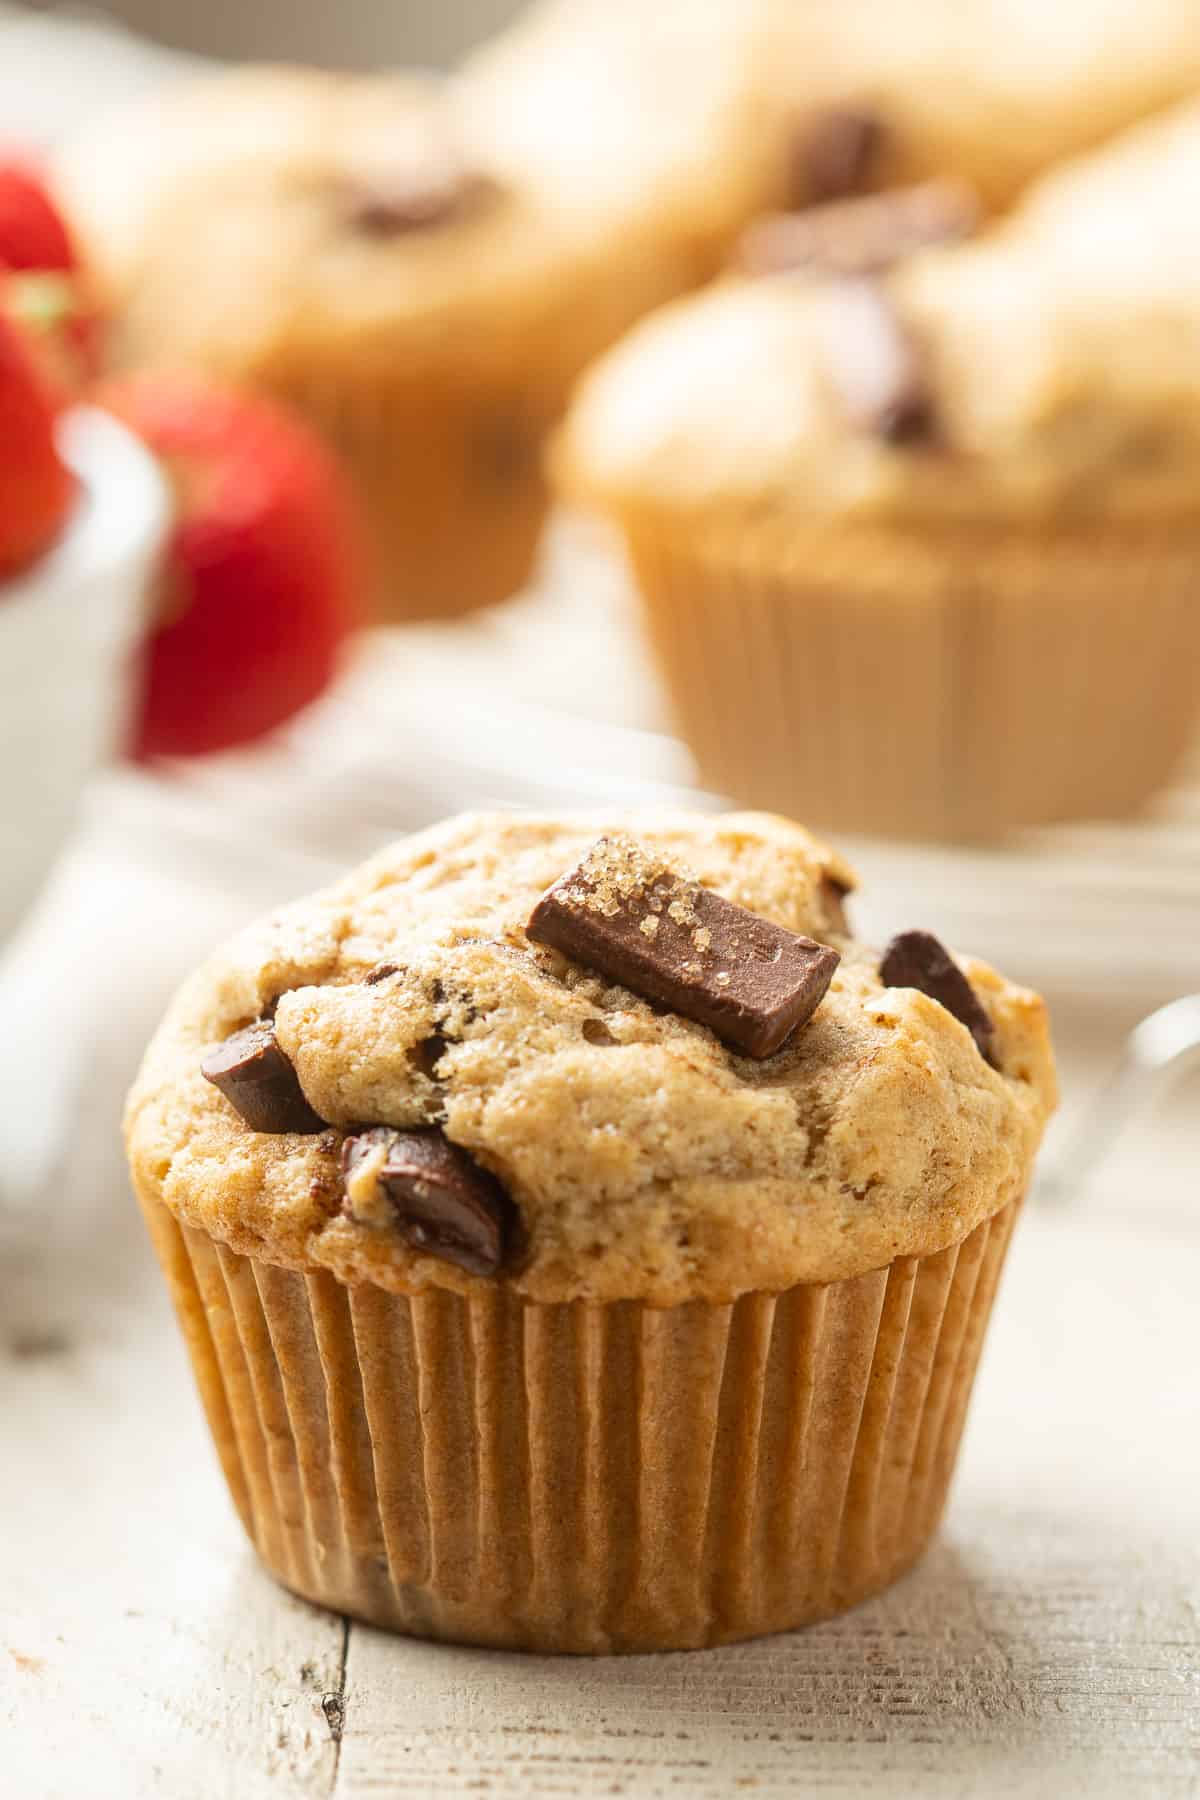 Vegan Chocolate Chip Muffin with additional muffins and strawberries in the background.